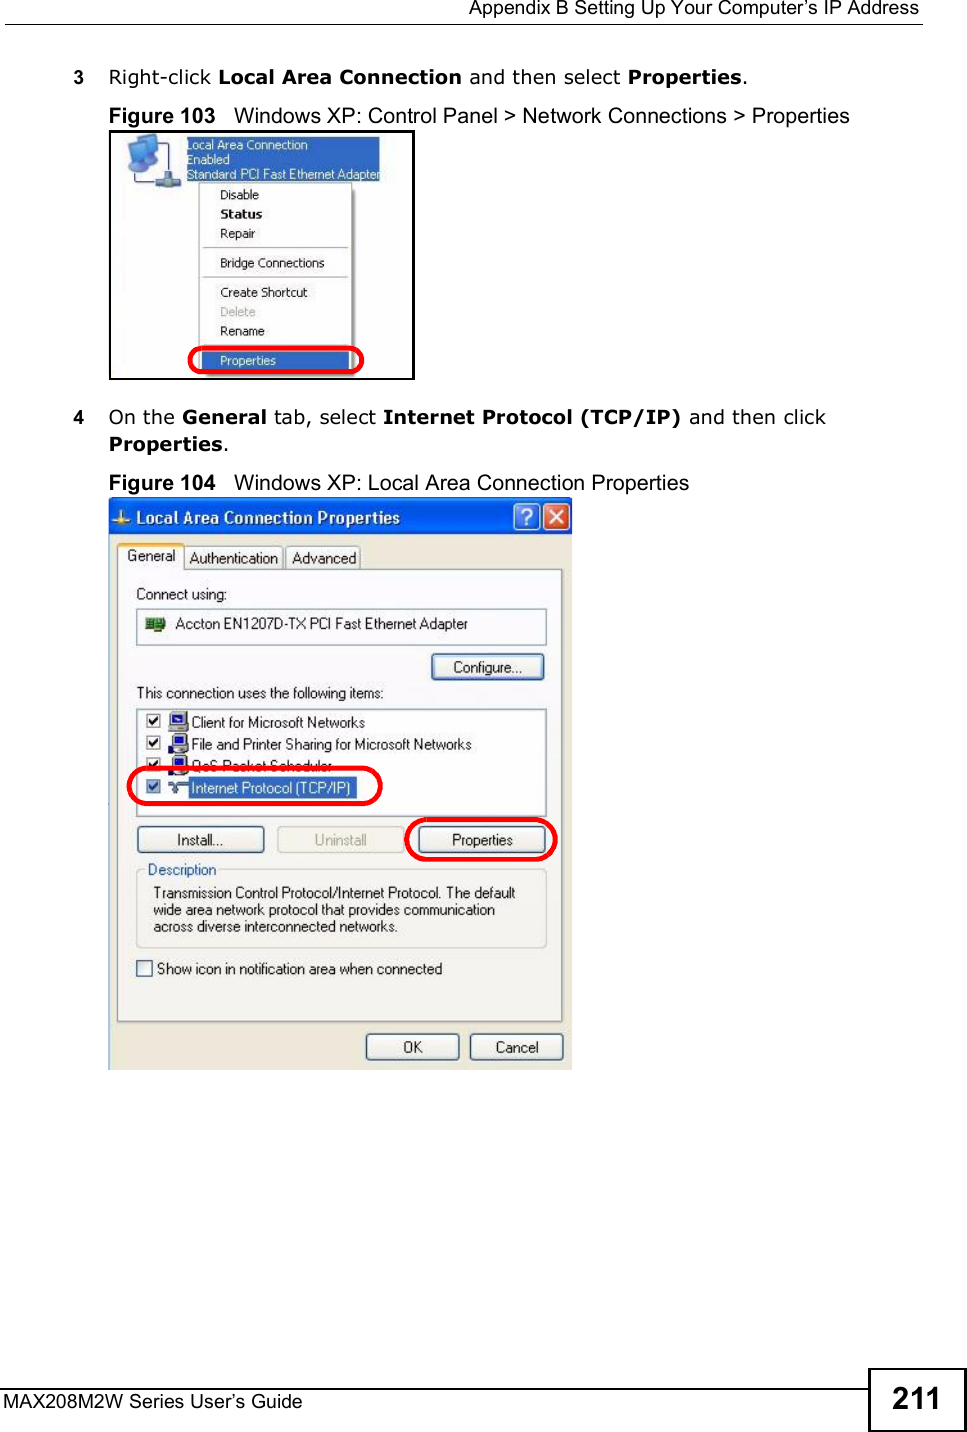  Appendix BSetting Up Your Computer s IP AddressMAX208M2W Series User s Guide 2113Right-click Local Area Connection and then select Properties.Figure 103   Windows XP: Control Panel &gt; Network Connections &gt; Properties4On the General tab, select Internet Protocol (TCP/IP) and then click Properties.Figure 104   Windows XP: Local Area Connection Properties